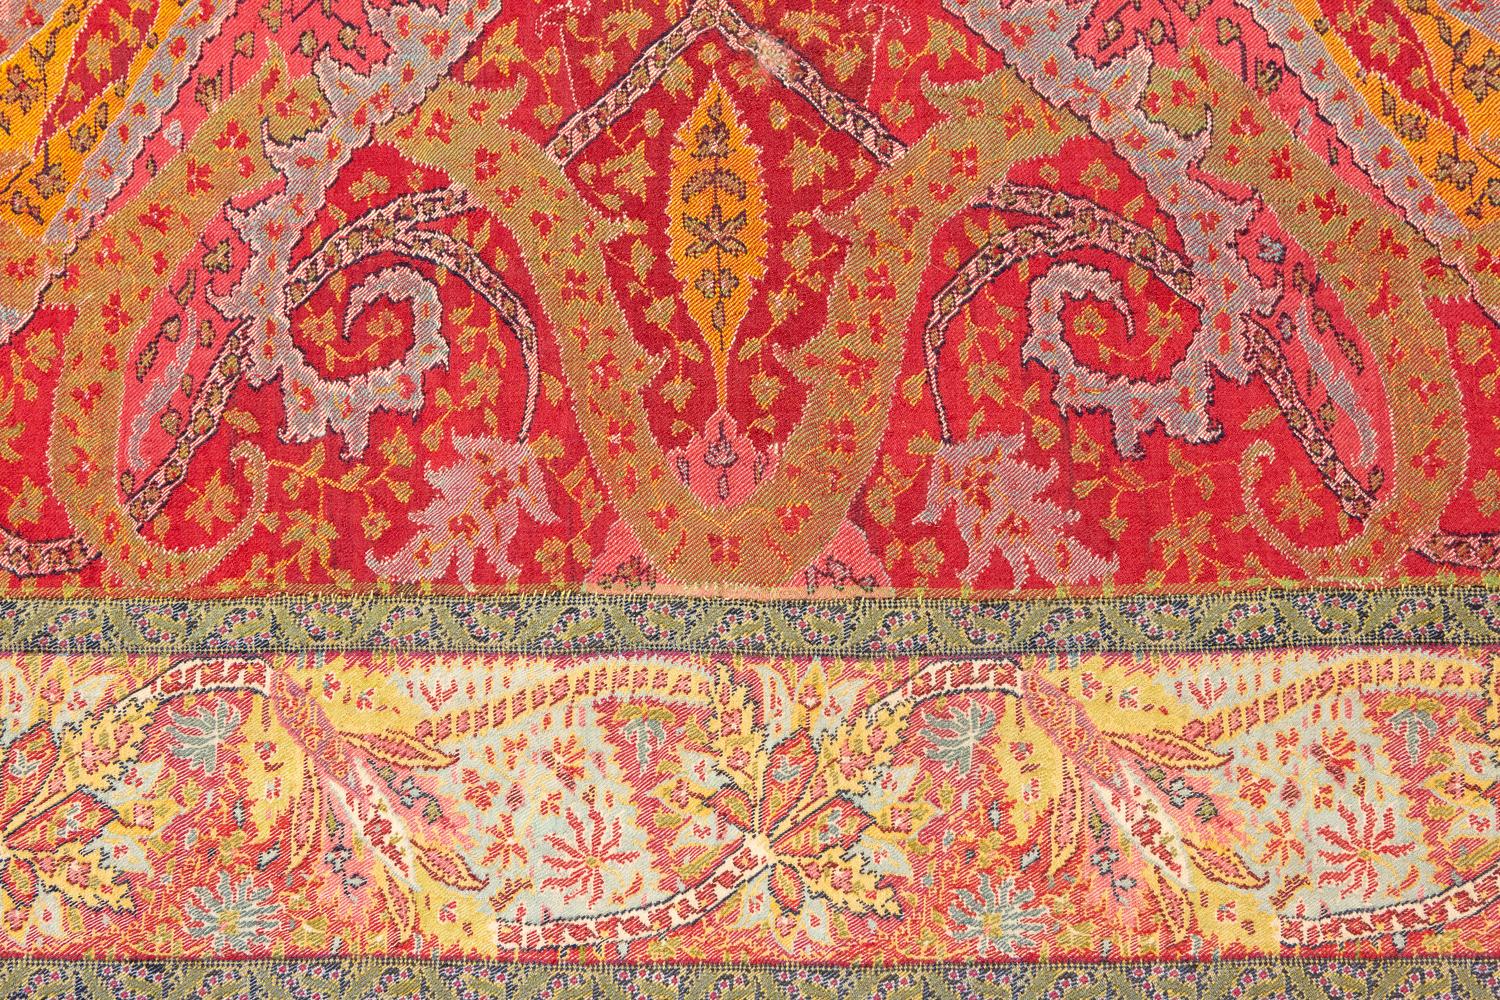 Hand-Knotted Kashmir Shawl Antique Indian Paisley And Arabesque Motifs Textile, 1800-1820 For Sale